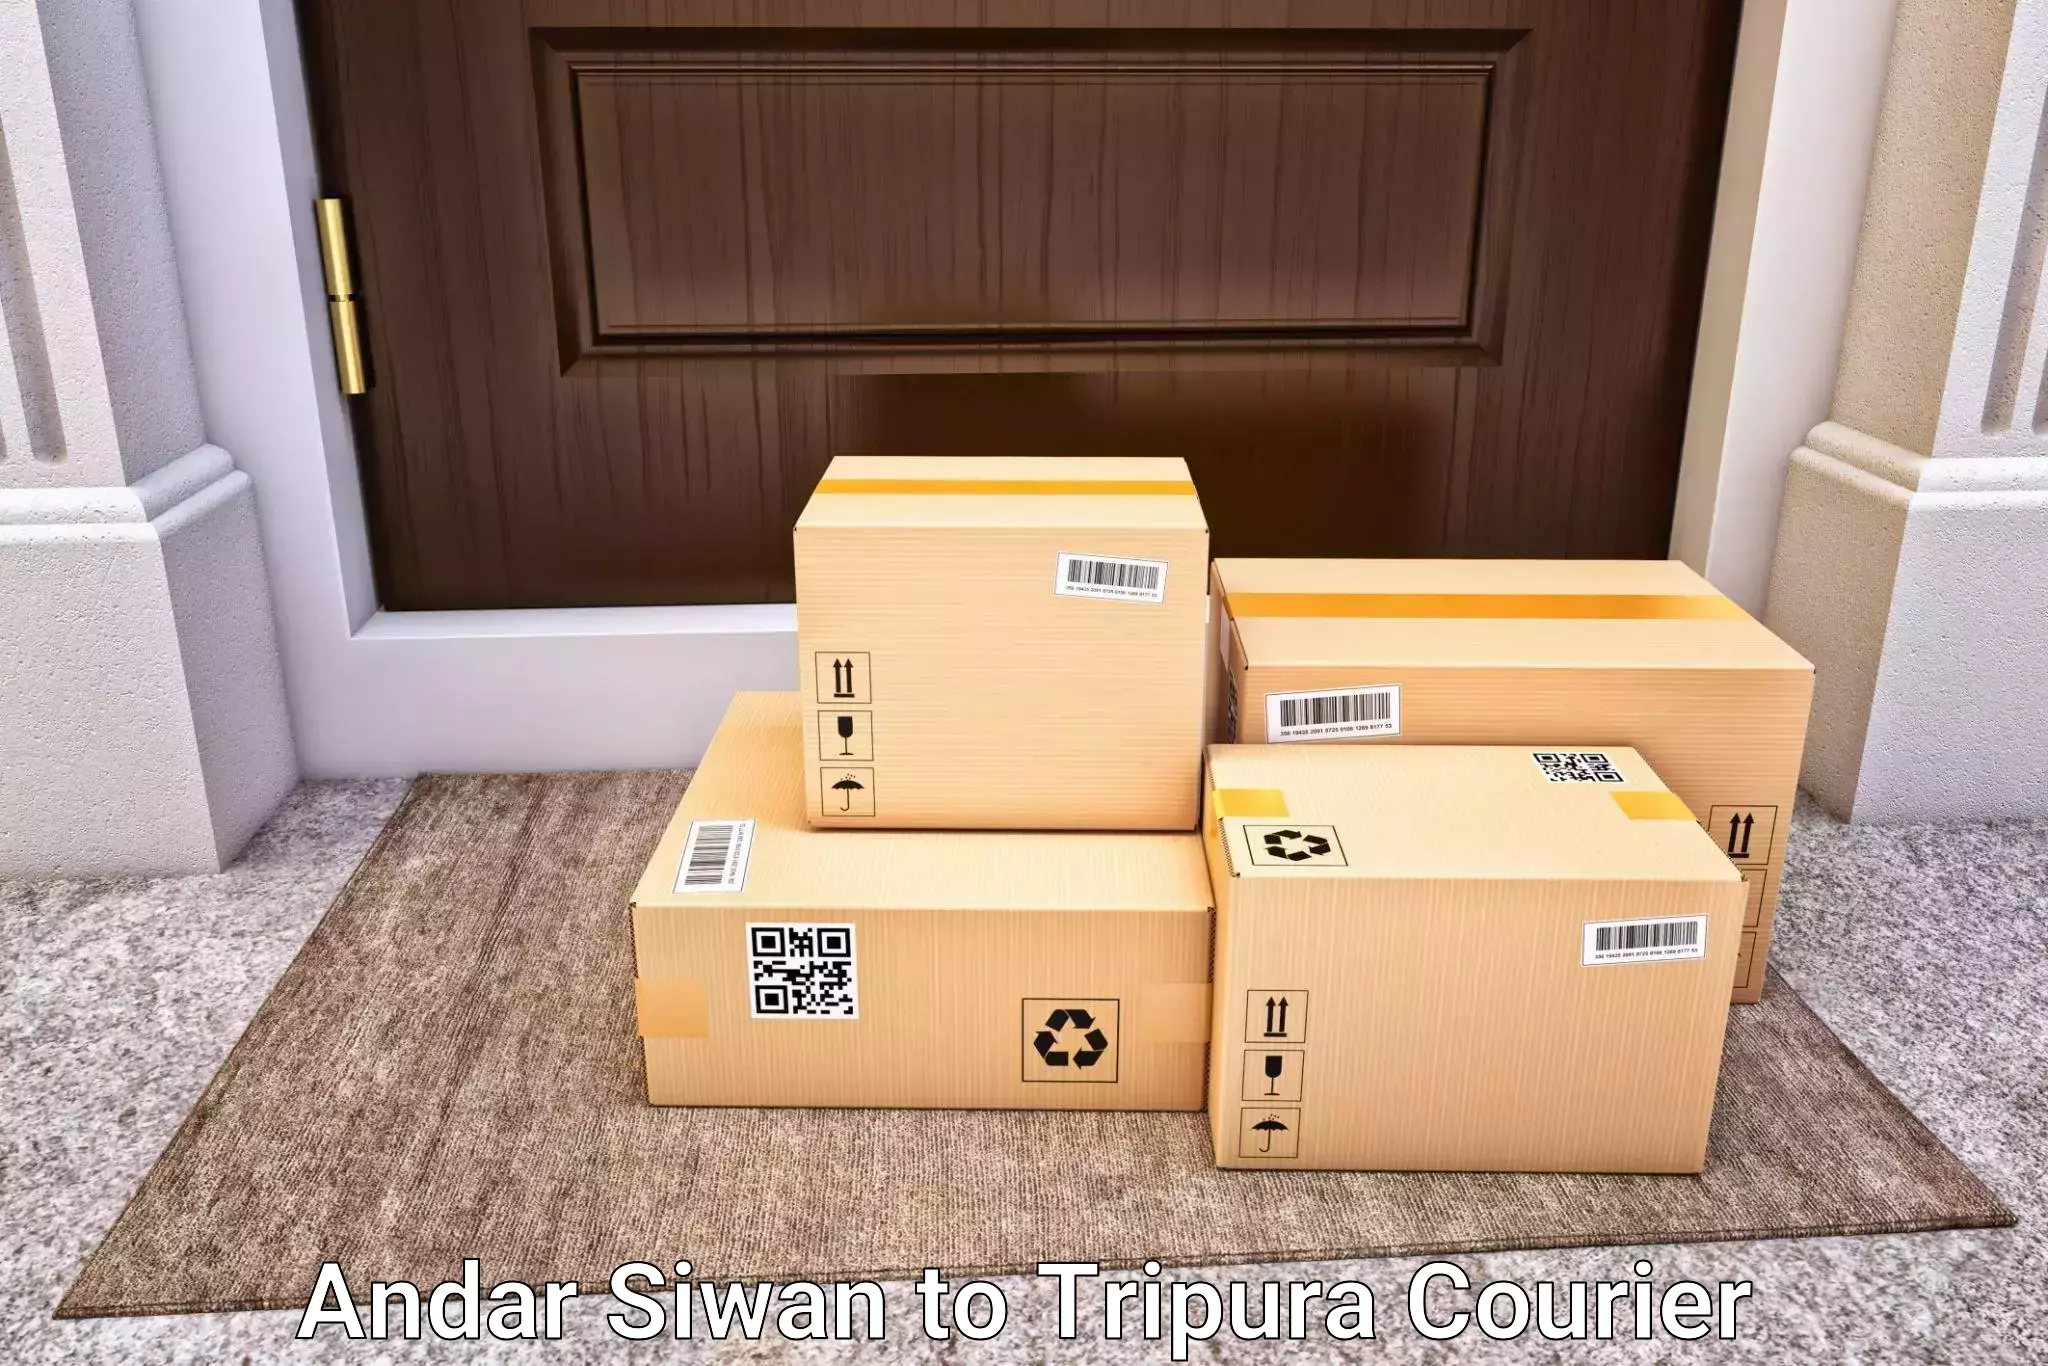 Instant baggage transport quote Andar Siwan to Tripura